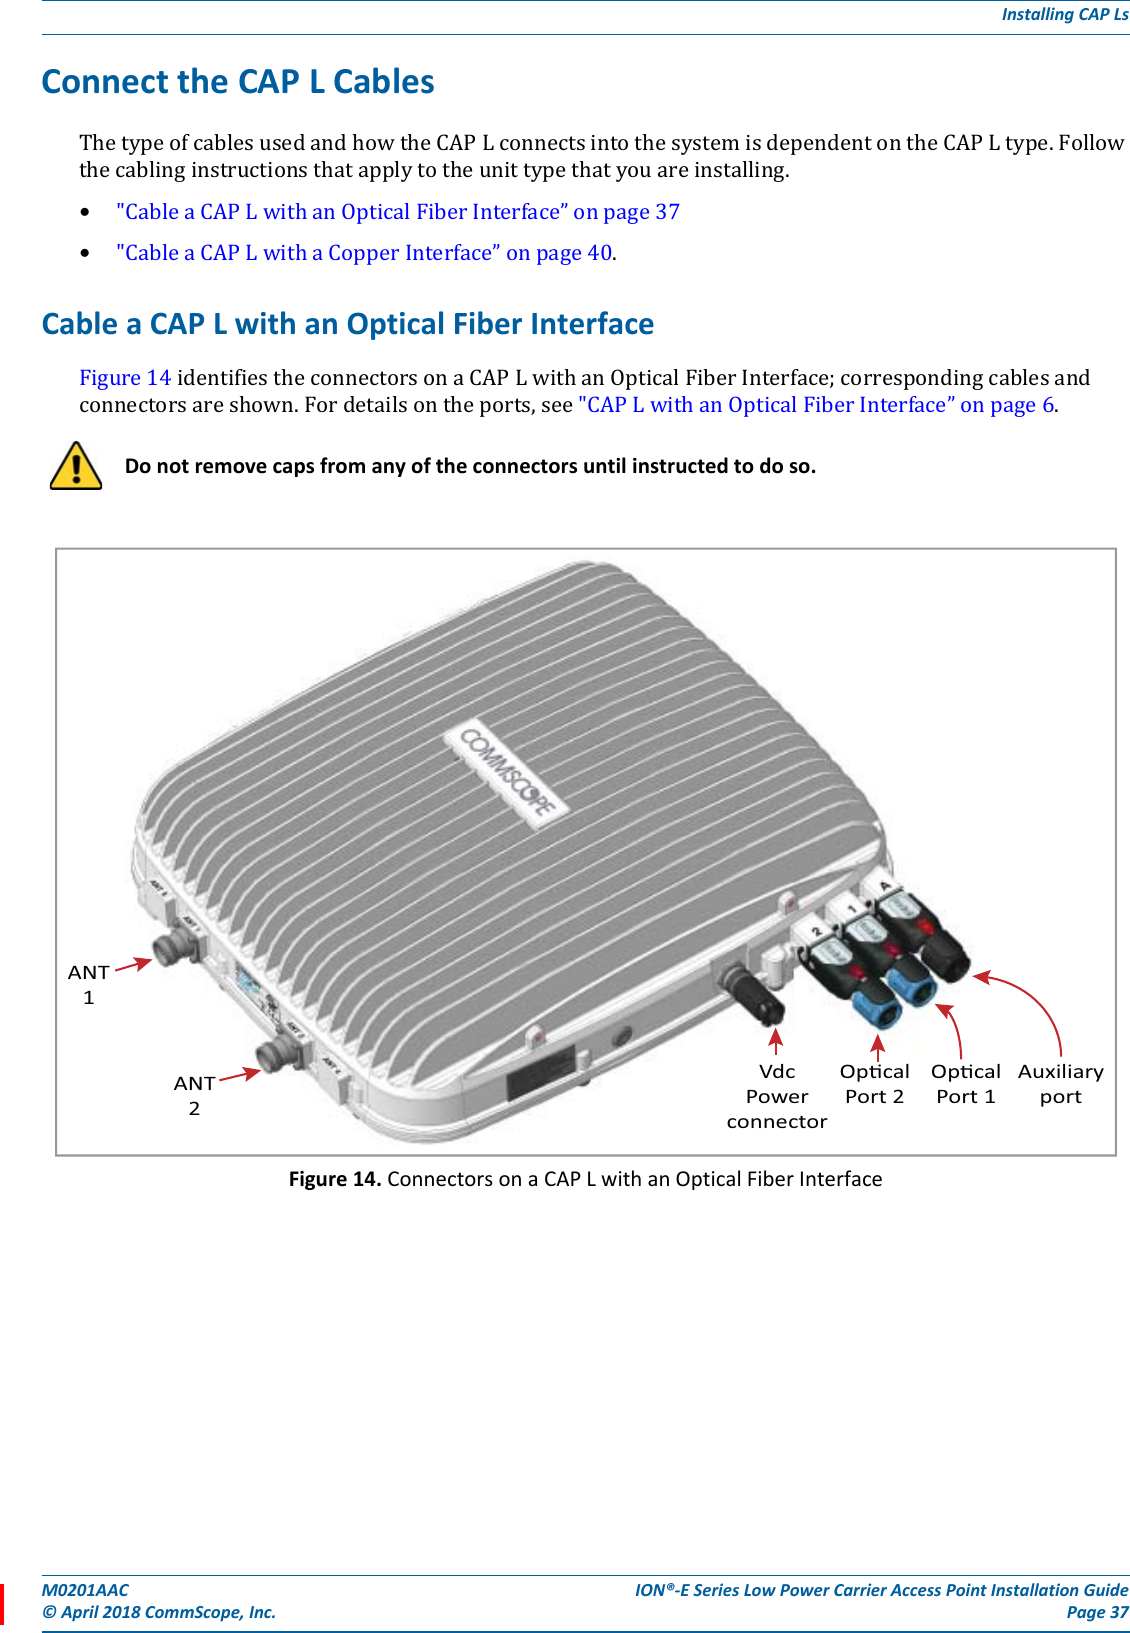 M0201AAC ION®-E Series Low Power Carrier Access Point Installation Guide© April 2018 CommScope, Inc. Page 37Installing CAP LsConnect the CAP L CablesThetypeofcablesusedandhowtheCAPLconnectsintothesystemisdependentontheCAPLtype.Followthecablinginstructionsthatapplytotheunittypethatyouareinstalling.•&quot;CableaCAPLwithanOpticalFiberInterface”onpage37•&quot;CableaCAPLwithaCopperInterface”onpage40.Cable a CAP L with an Optical Fiber InterfaceFigure14identifiestheconnectorsonaCAPLwithanOpticalFiberInterface;correspondingcablesandconnectorsareshown.Fordetailsontheports,see&quot;CAPLwithanOpticalFiberInterface”onpage6.Figure 14. Connectors on a CAP L with an Optical Fiber InterfaceDo not remove caps from any of the connectors until instructed to do so.ANT1ANT2VdcPowerconnectorOpcalPort 2OpcalPort 1Auxiliaryport